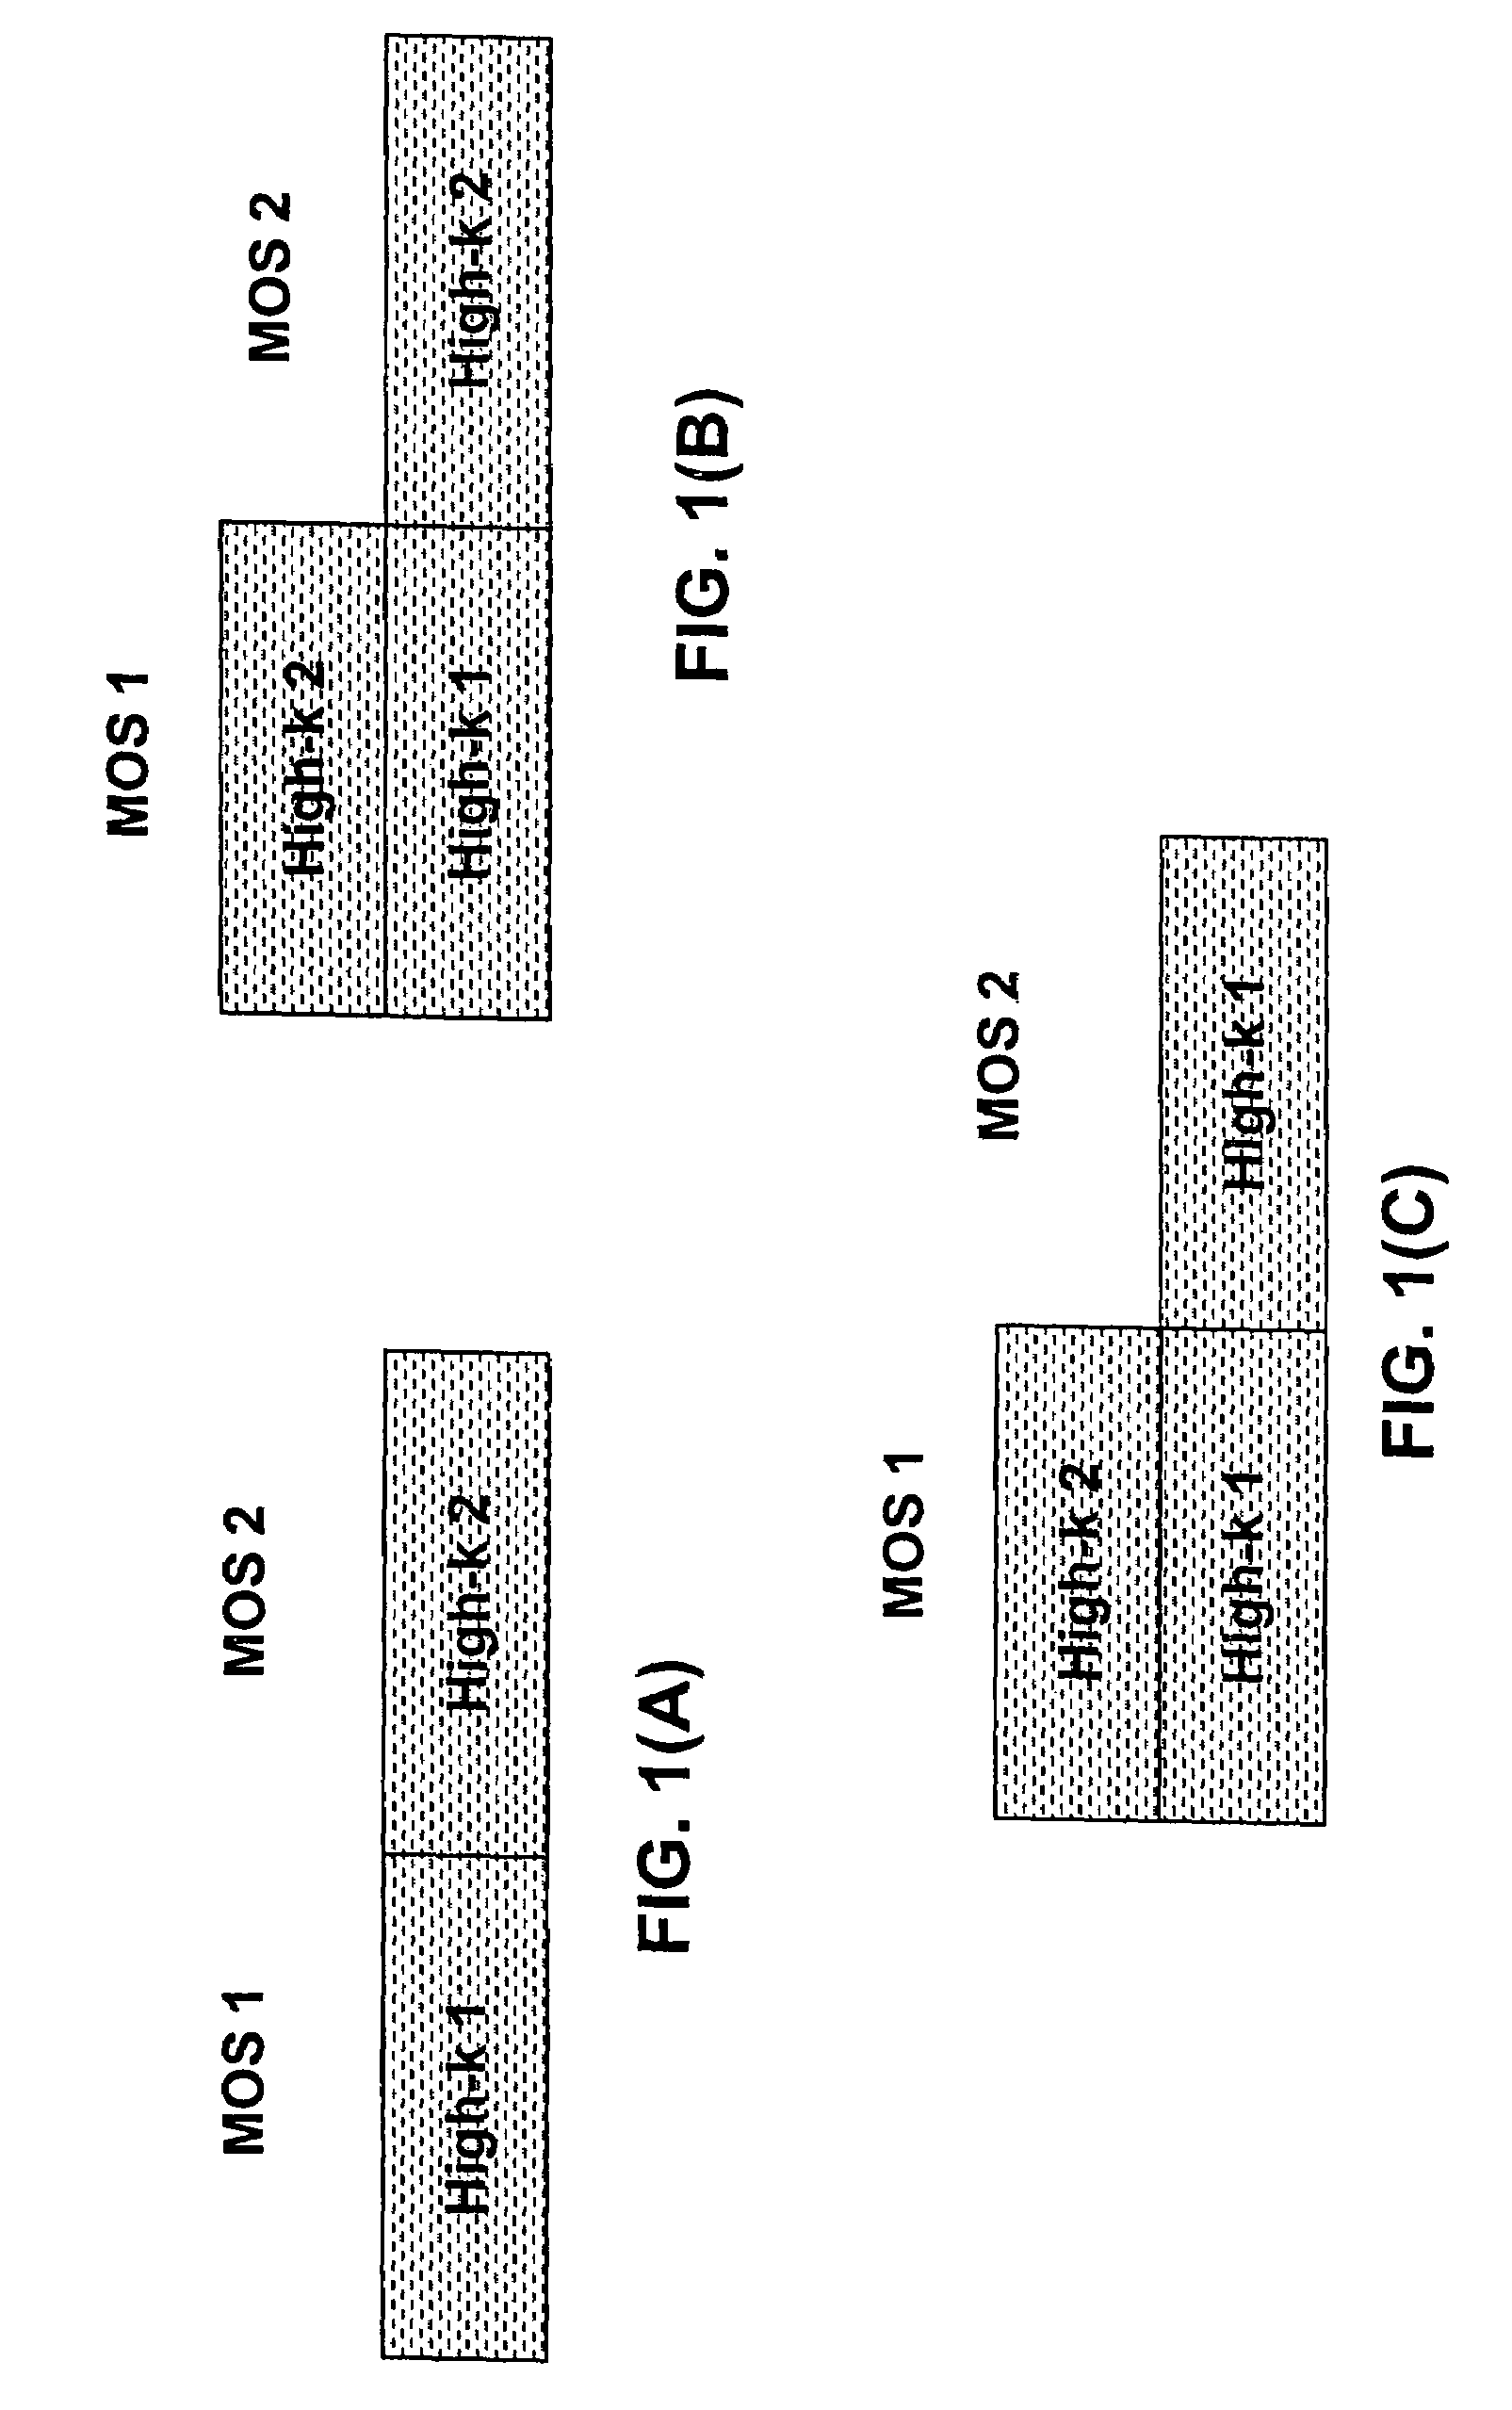 Semiconductor devices having different gate dielectrics and methods for manufacturing the same